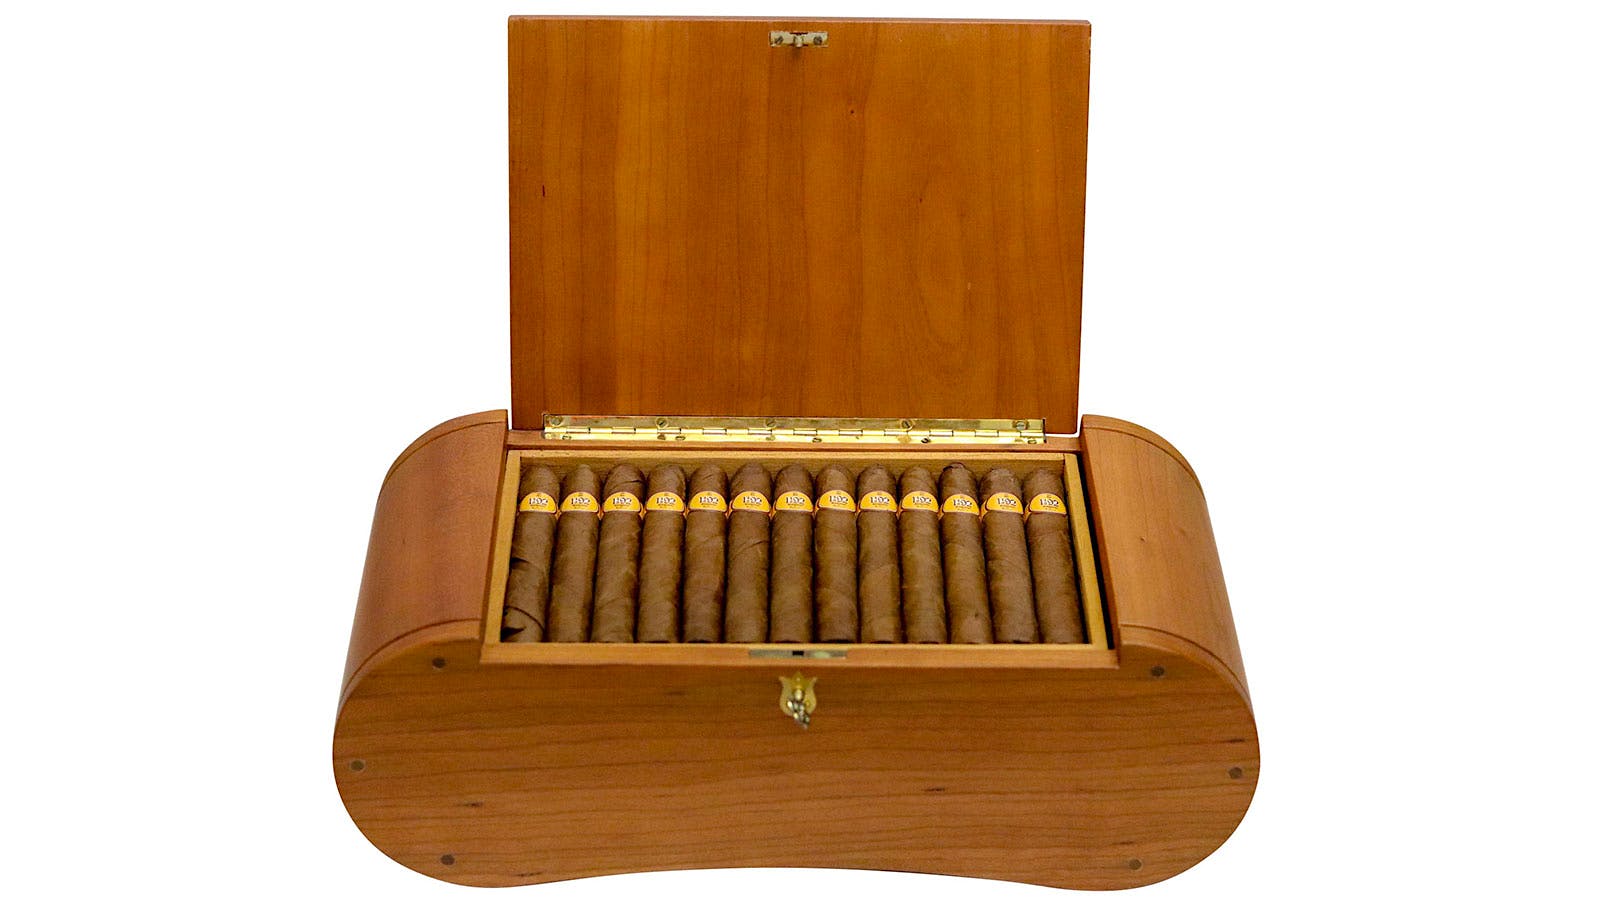 Only 500 of the oblong-shaped 1492 humidors were produced.